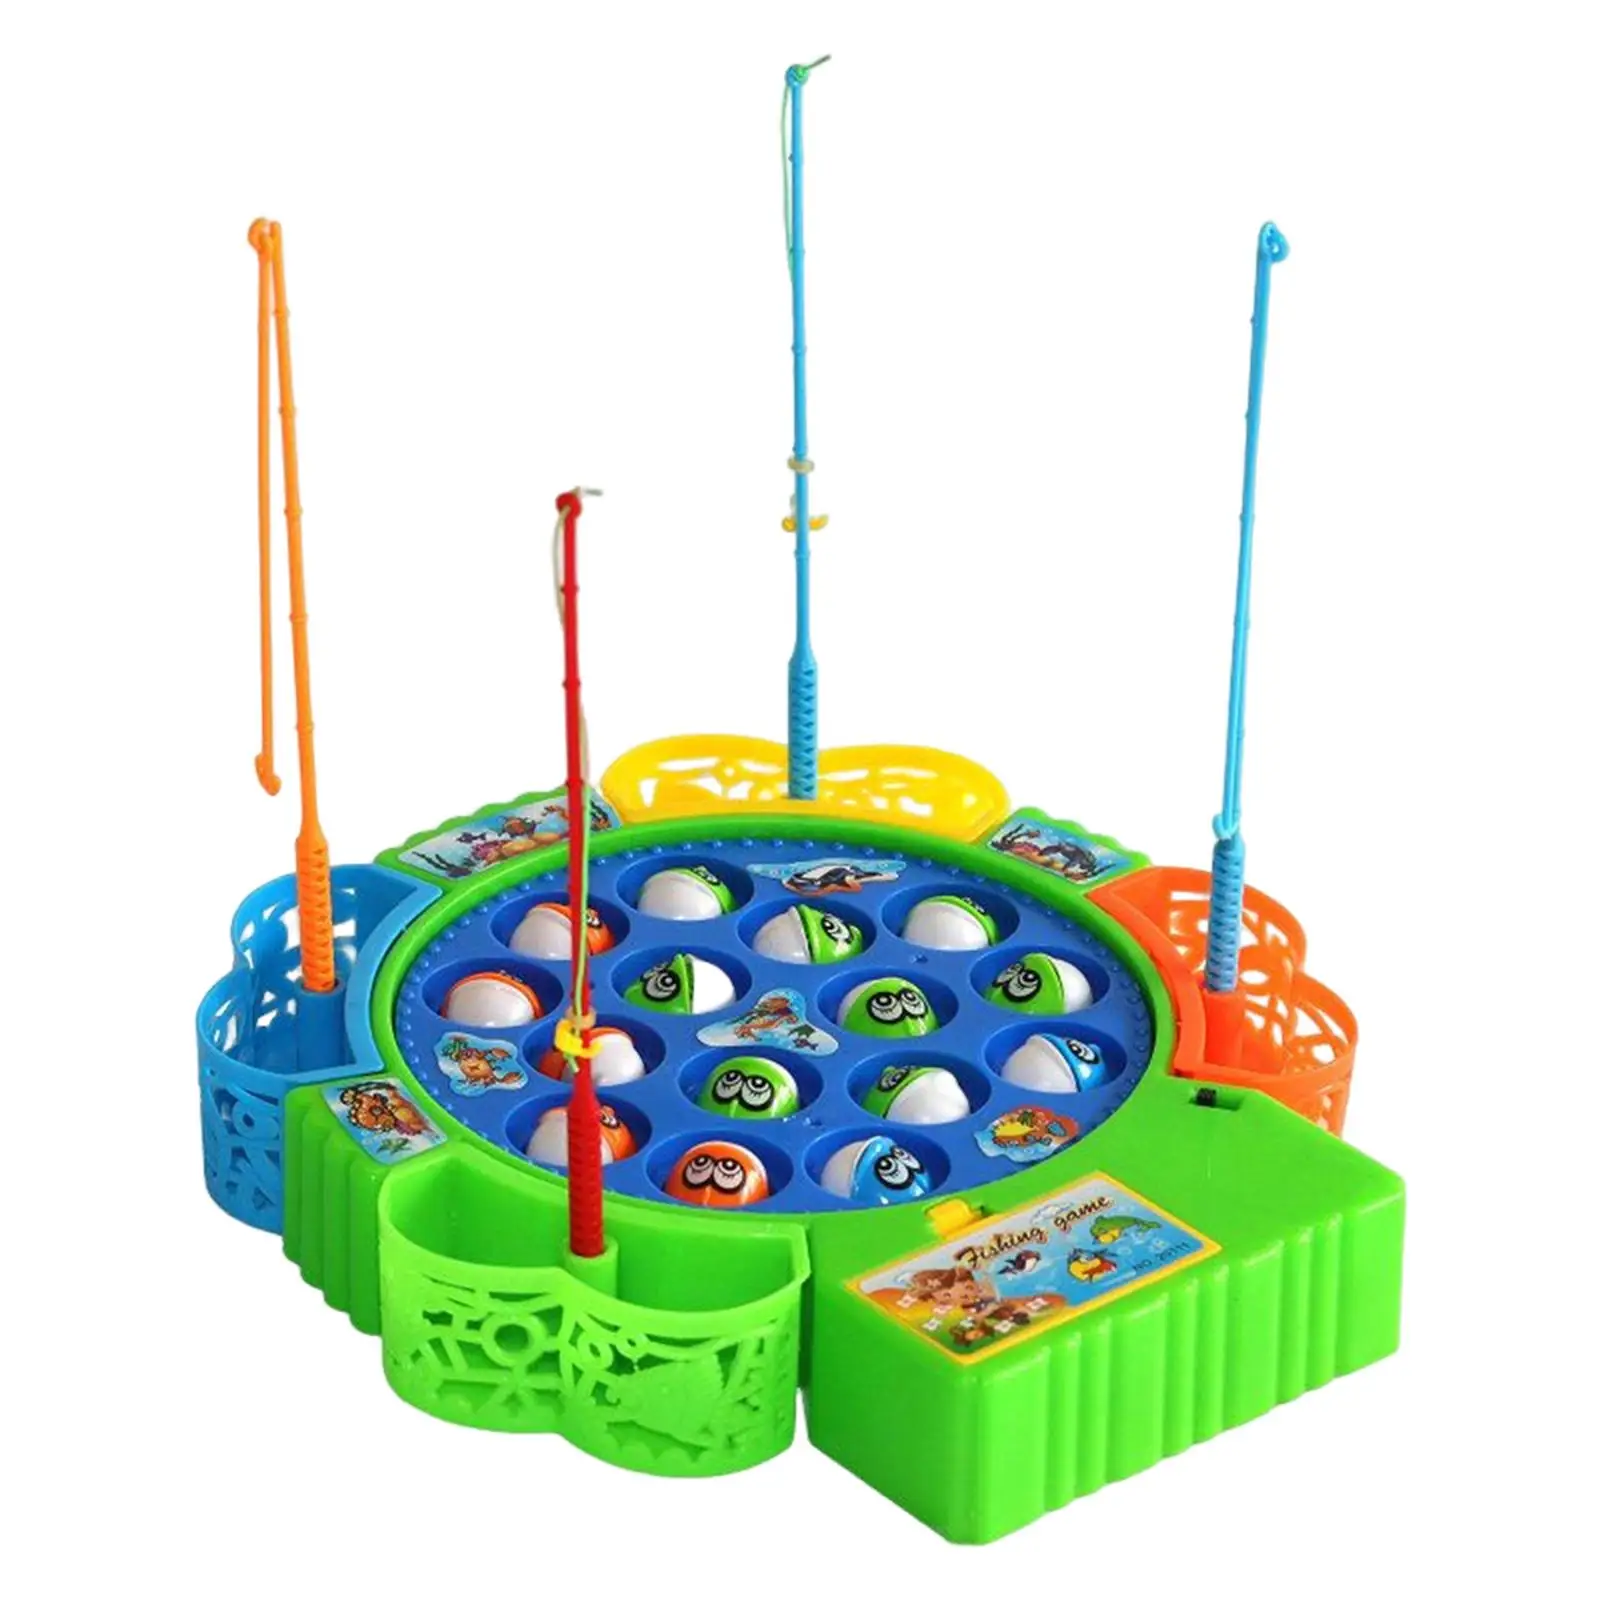 Novelty Rotating Fishing Game Kids Toy Ability Training for Educational toy, kids Children